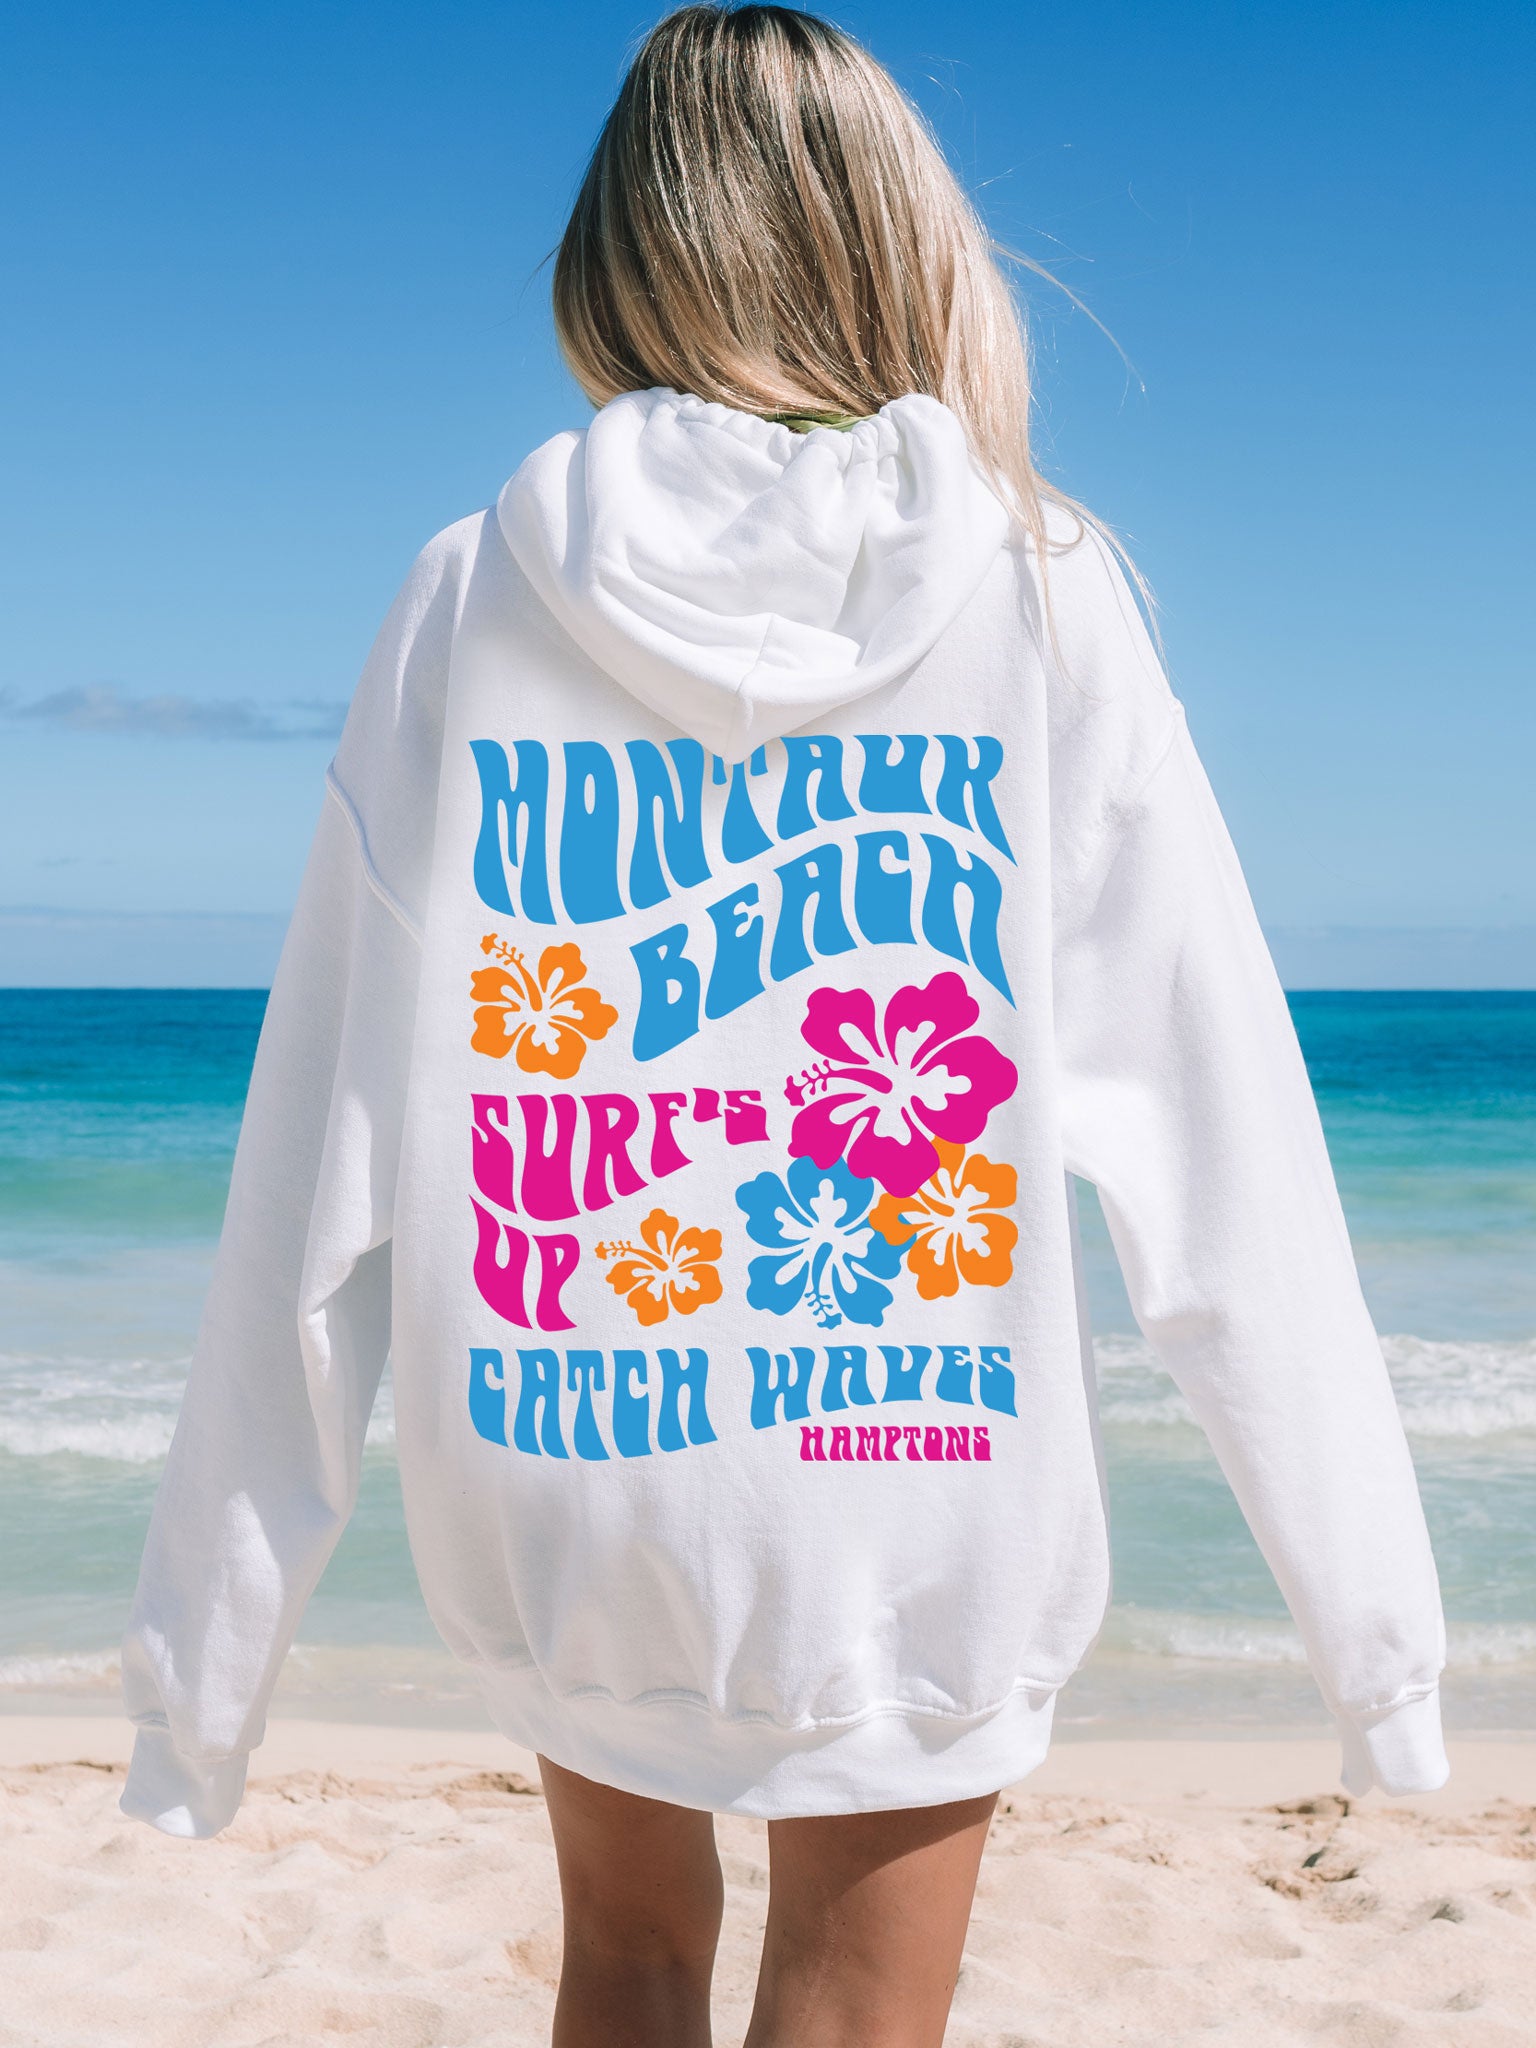 Coconut Girl Hibiscus Surf Hoodie White with Colorful Ink Montauk Beach Hamptons